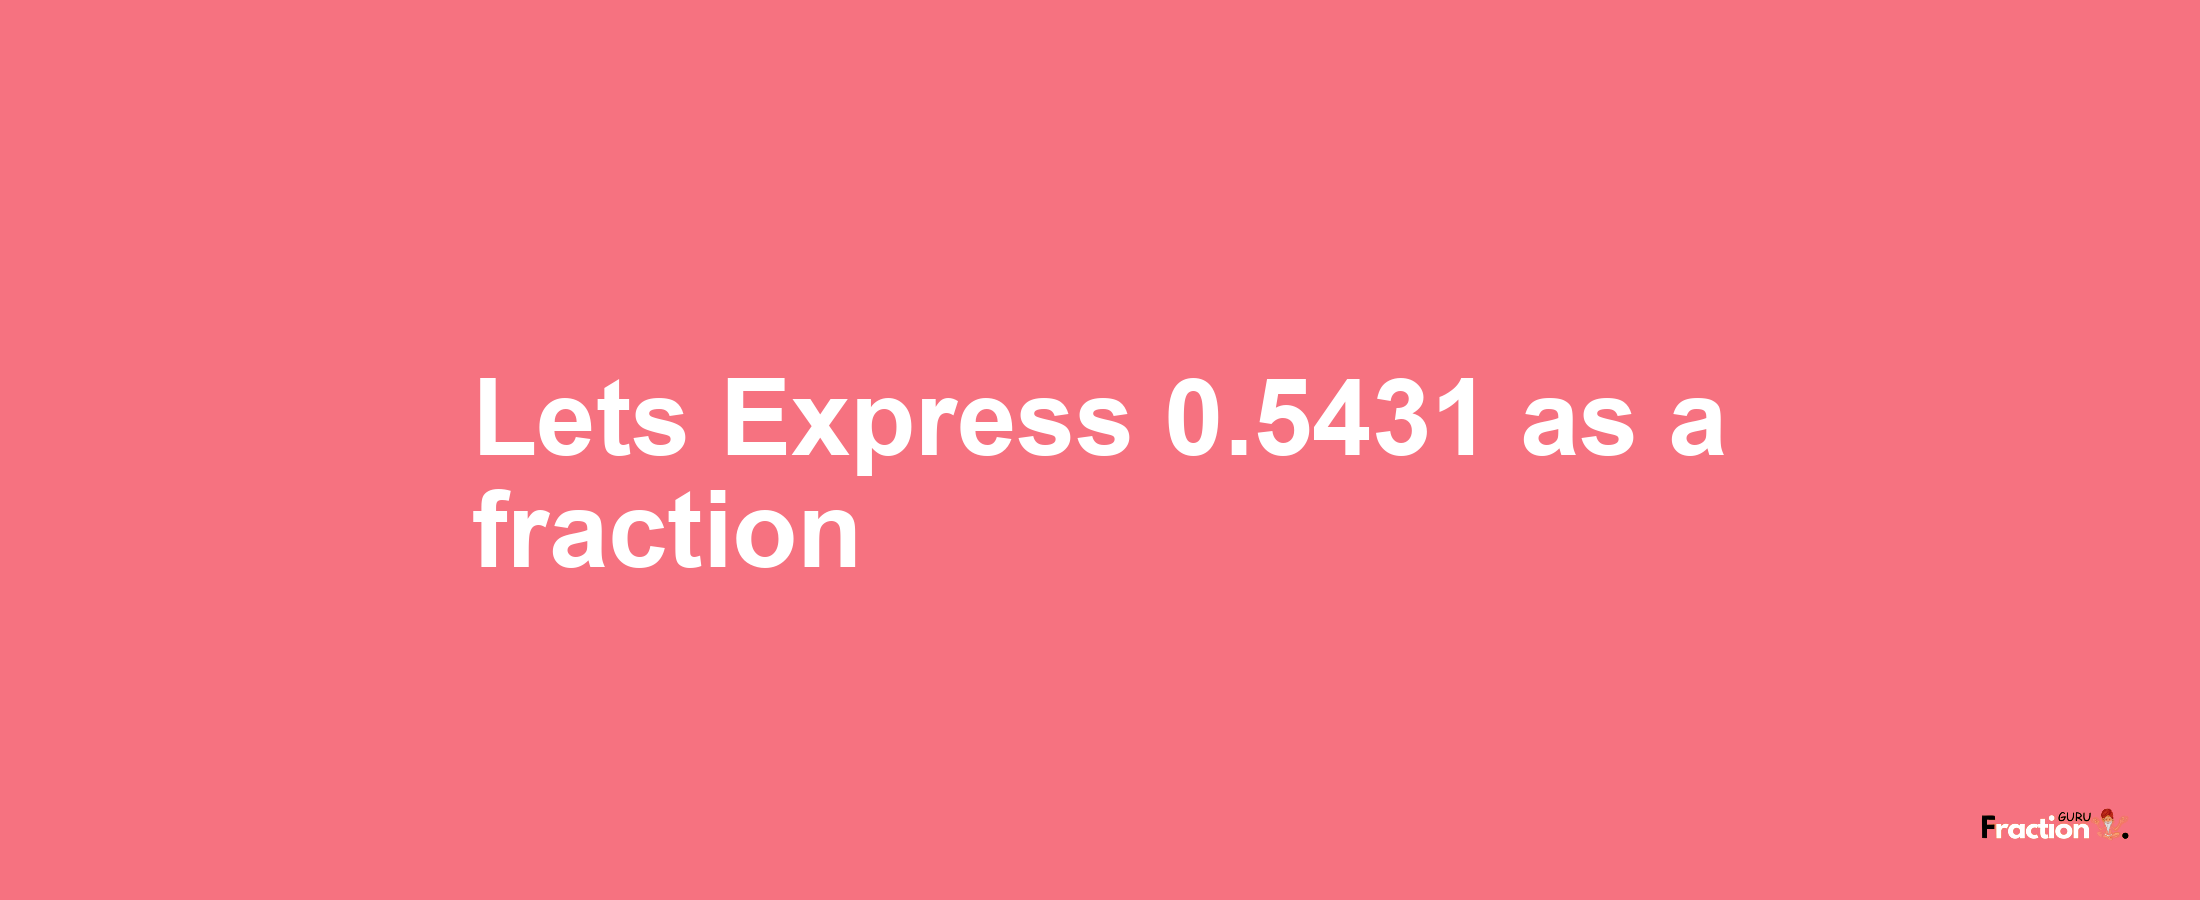 Lets Express 0.5431 as afraction